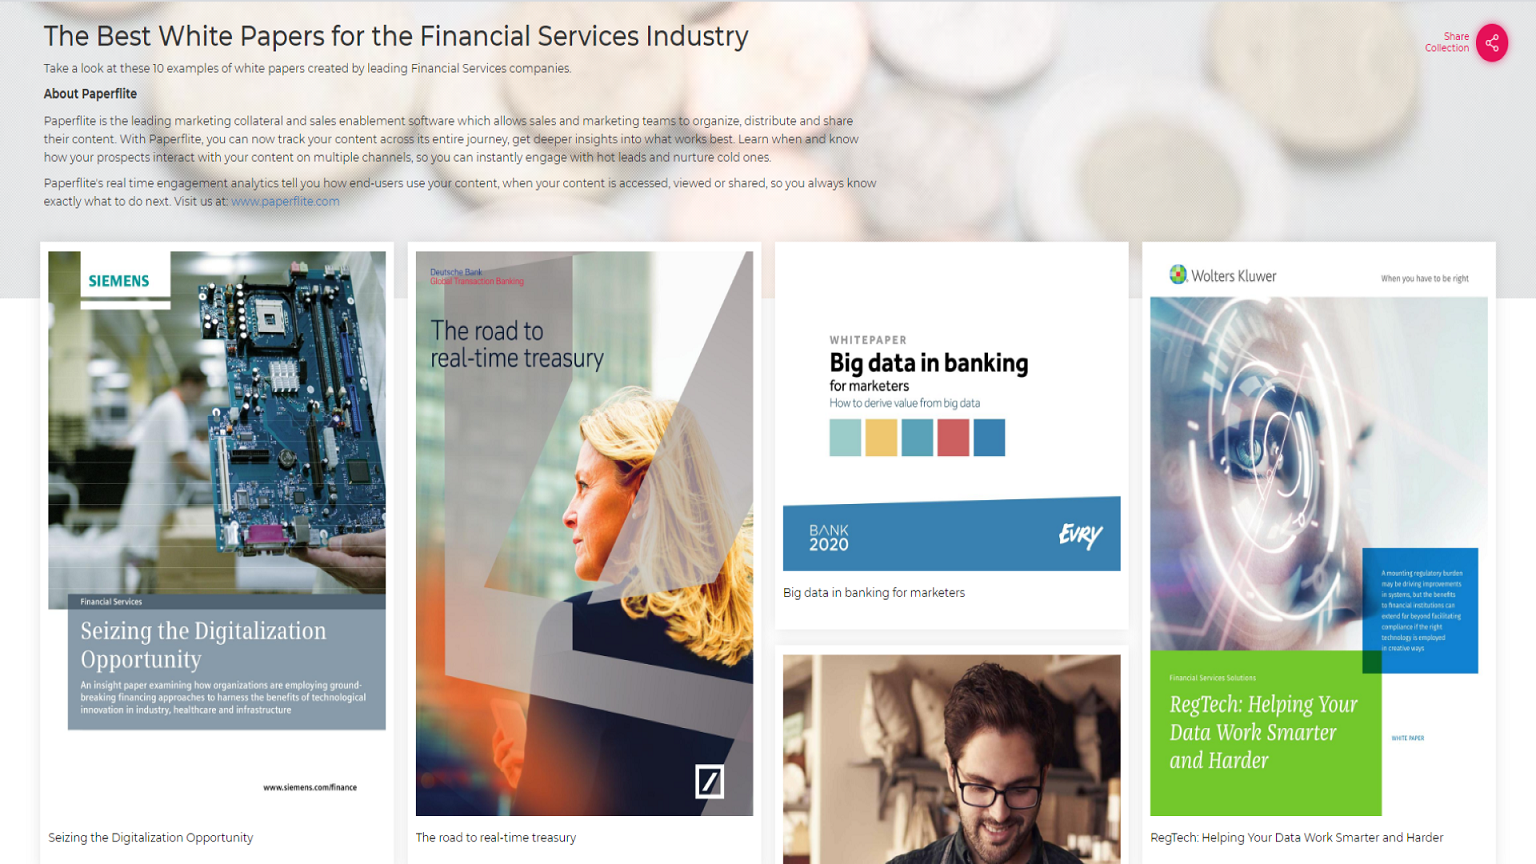 The Best White Papers for the Financial Services Industry